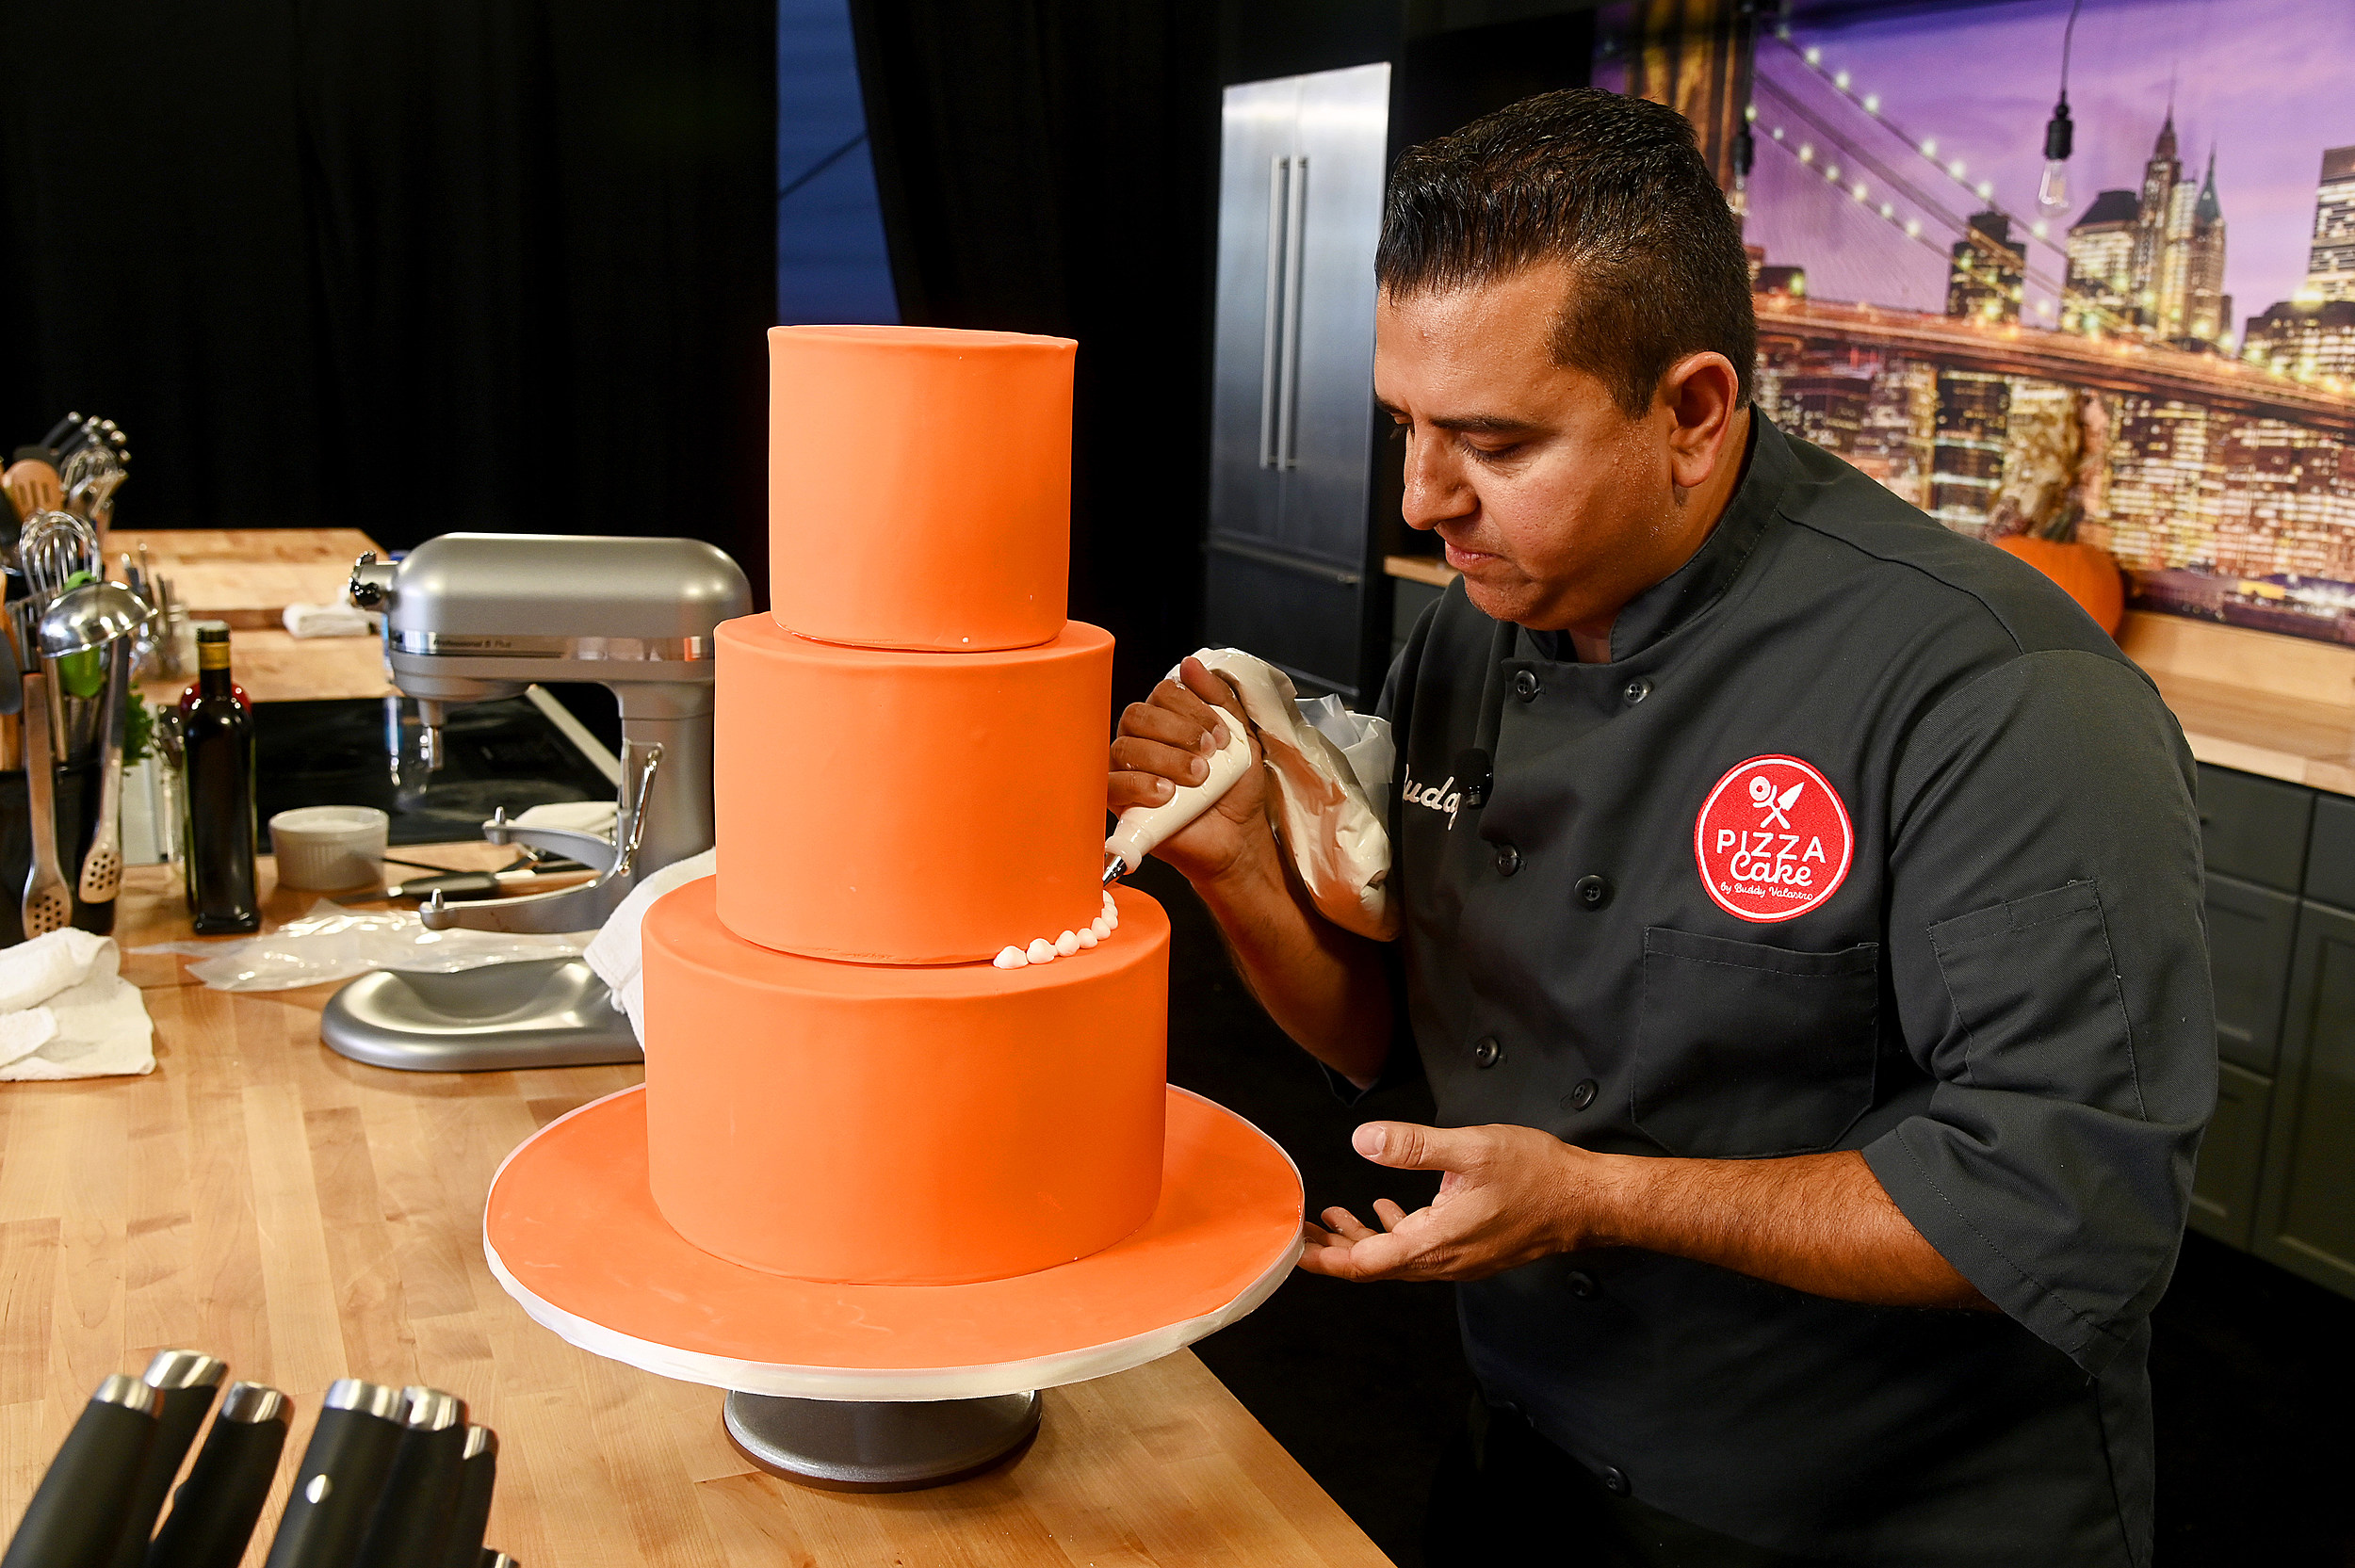 Buddy Valastro of 'Cake Boss' to sell his creations nationwide | Fox News